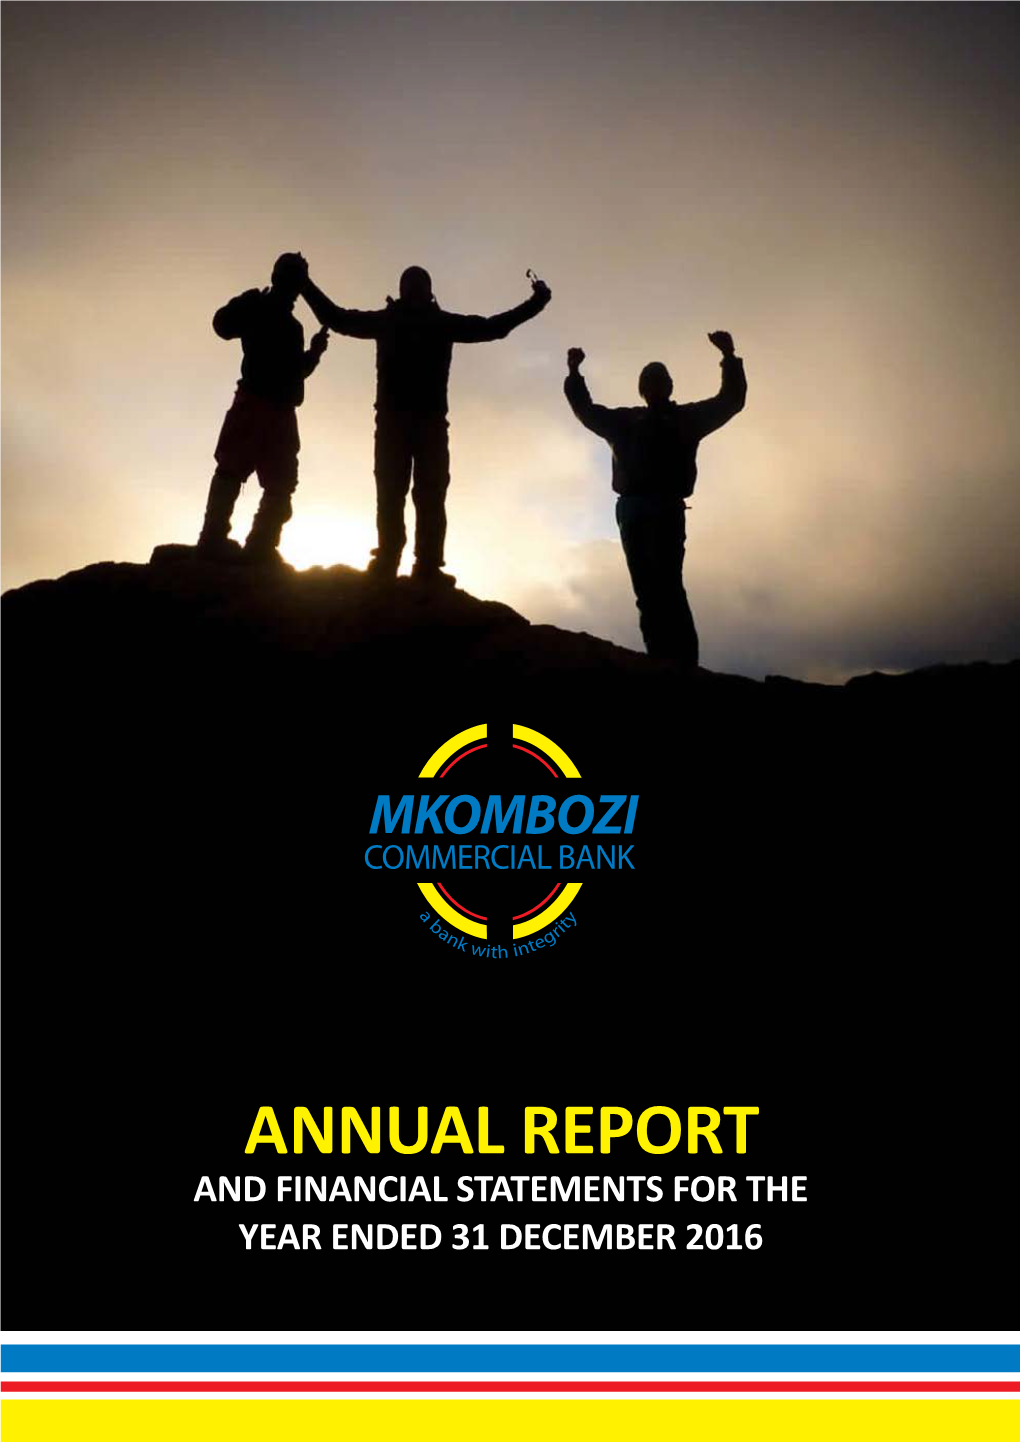 Annual Report and Financial Statements for the Year Ended 31 December 2016